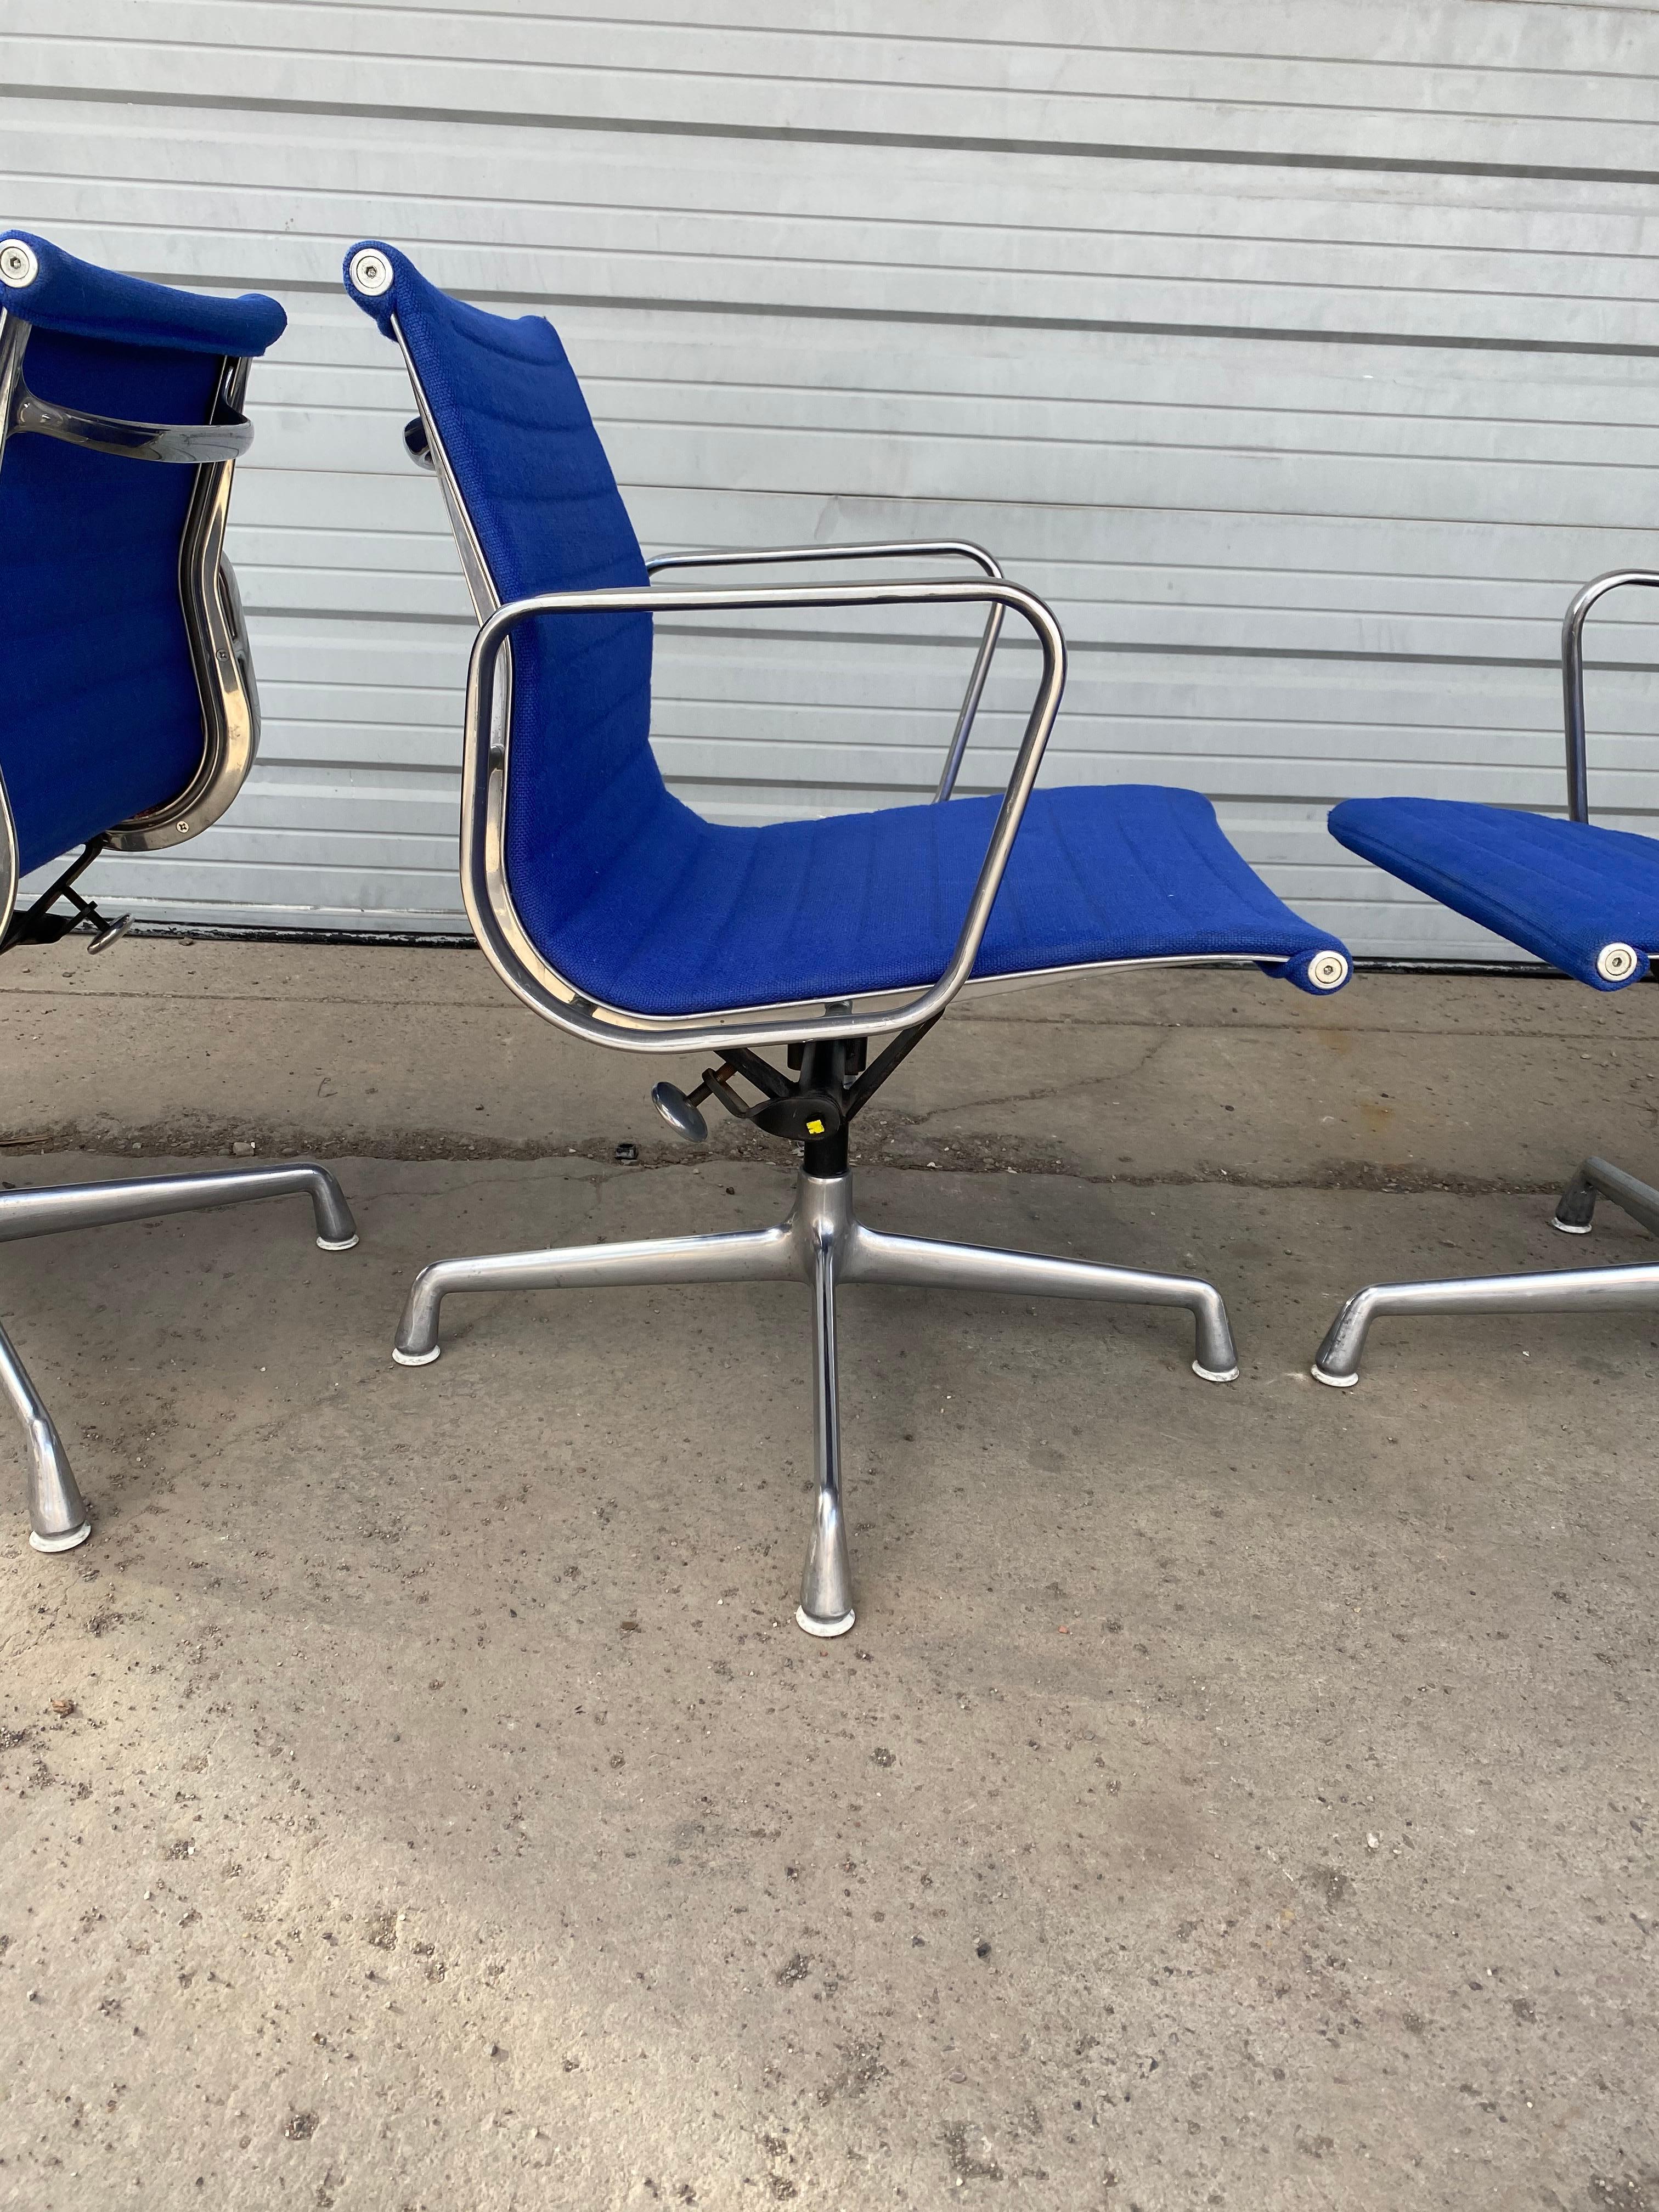 Classic set 4 vintage Eames aluminum group armchairs / Herman Miller, retains original electric blue wool upholstery, early 4-star aluminum base,tilt , swivel ,great original condition. Minor wear to corner of one chair, hand delivery avail to New